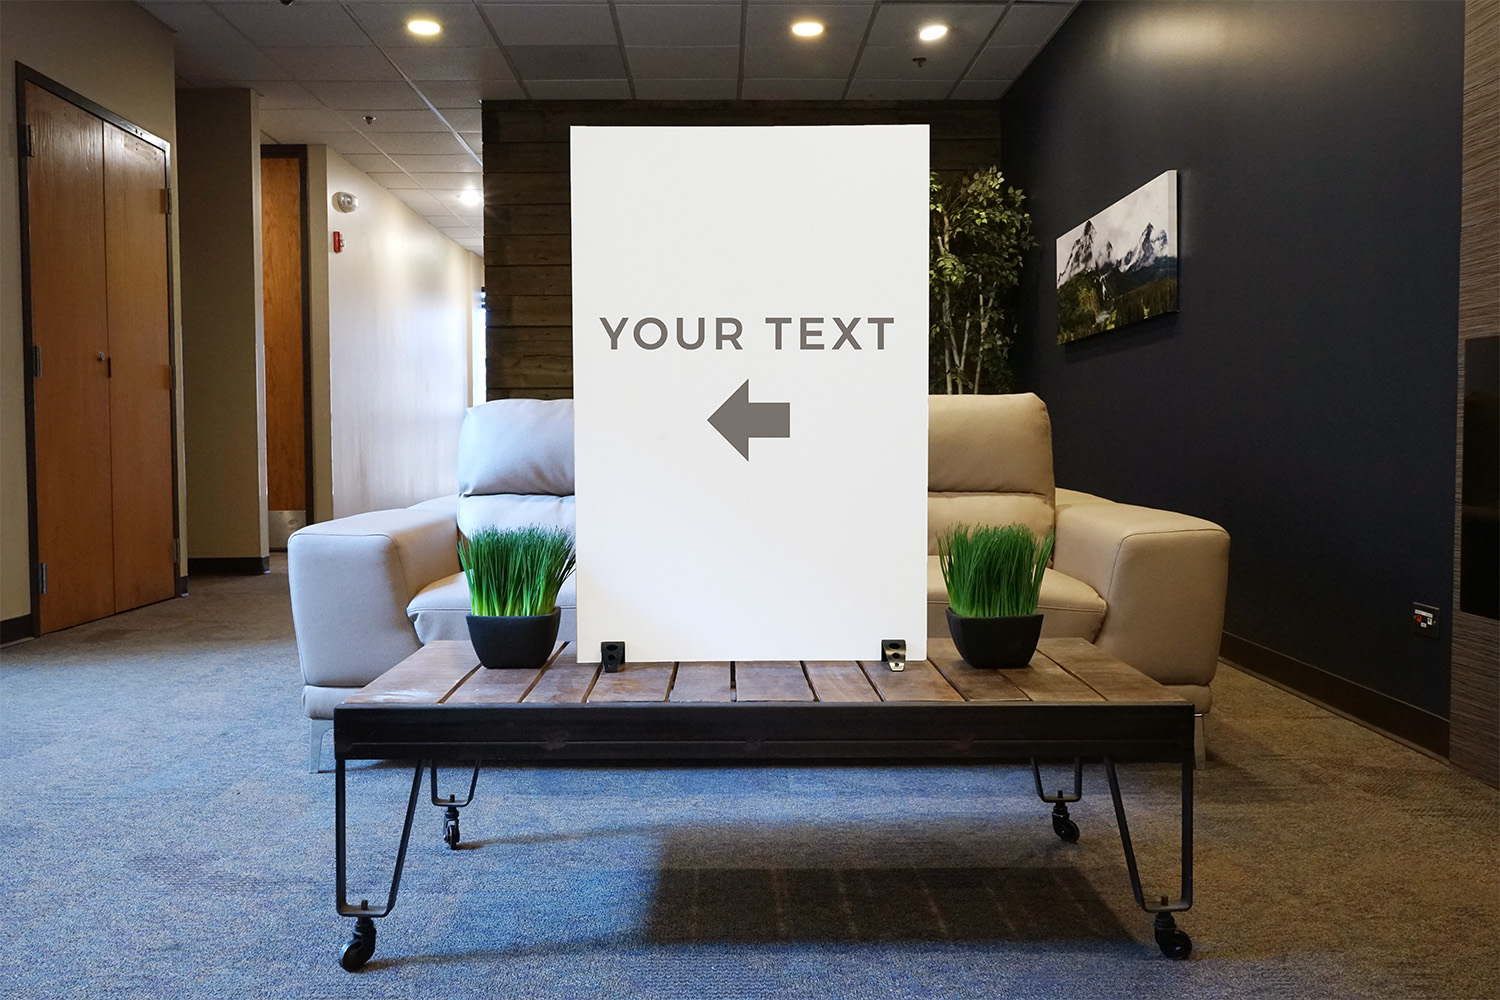 Rigid Signs, Colorful Lights Products, Colorful Lights Your Text, 23 x 34.5 6